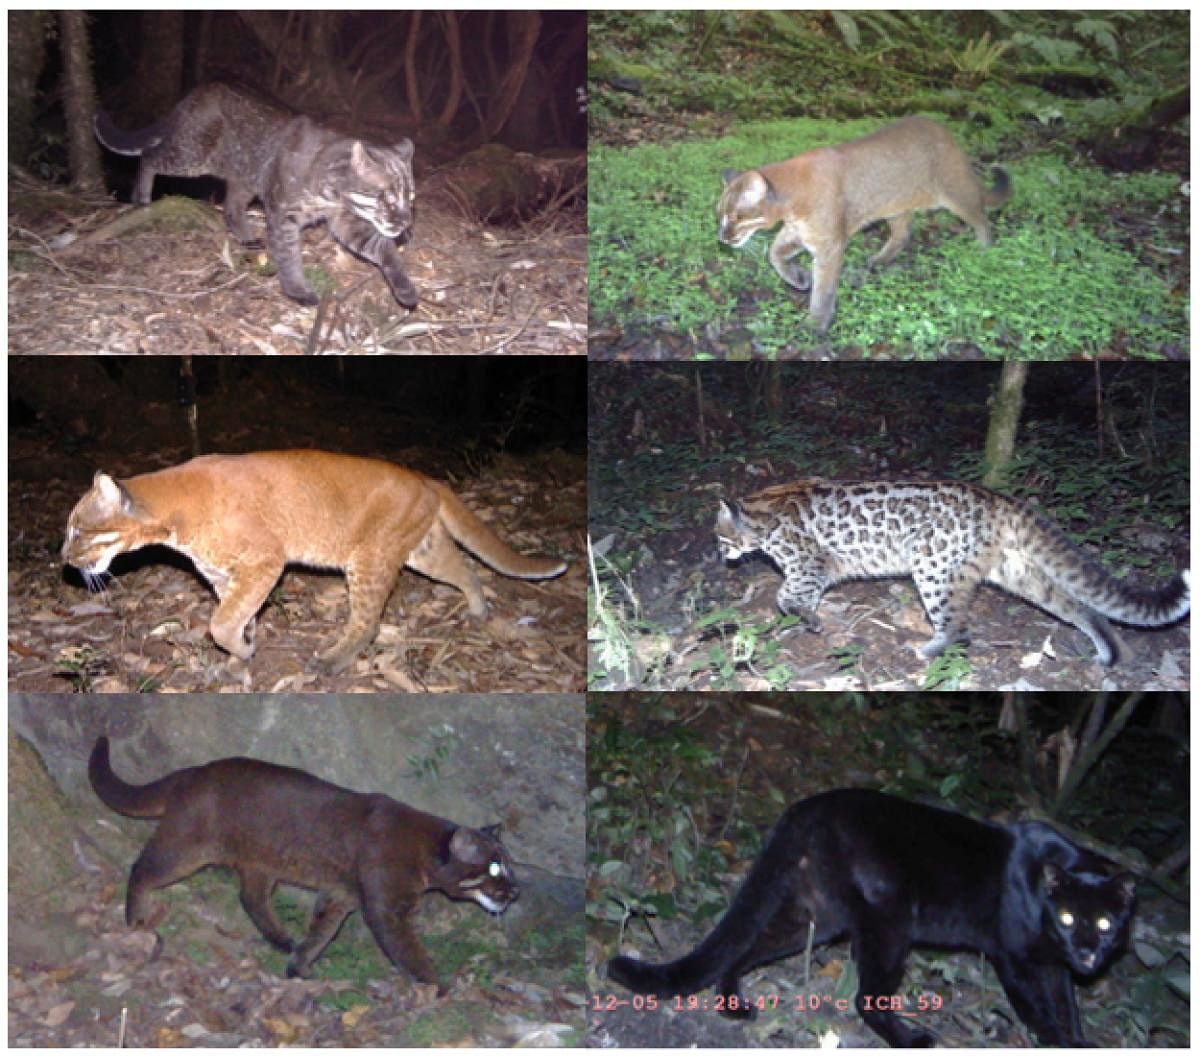 wild hues: (From top left, clock-wise) Tightly-rosetted morph, Gray morph, Ocelot morph, Melanistic form, Cinnamon morph and Golden morph of the Asiatic golden cat. Sahil Nijhawan/Panthera/APFD